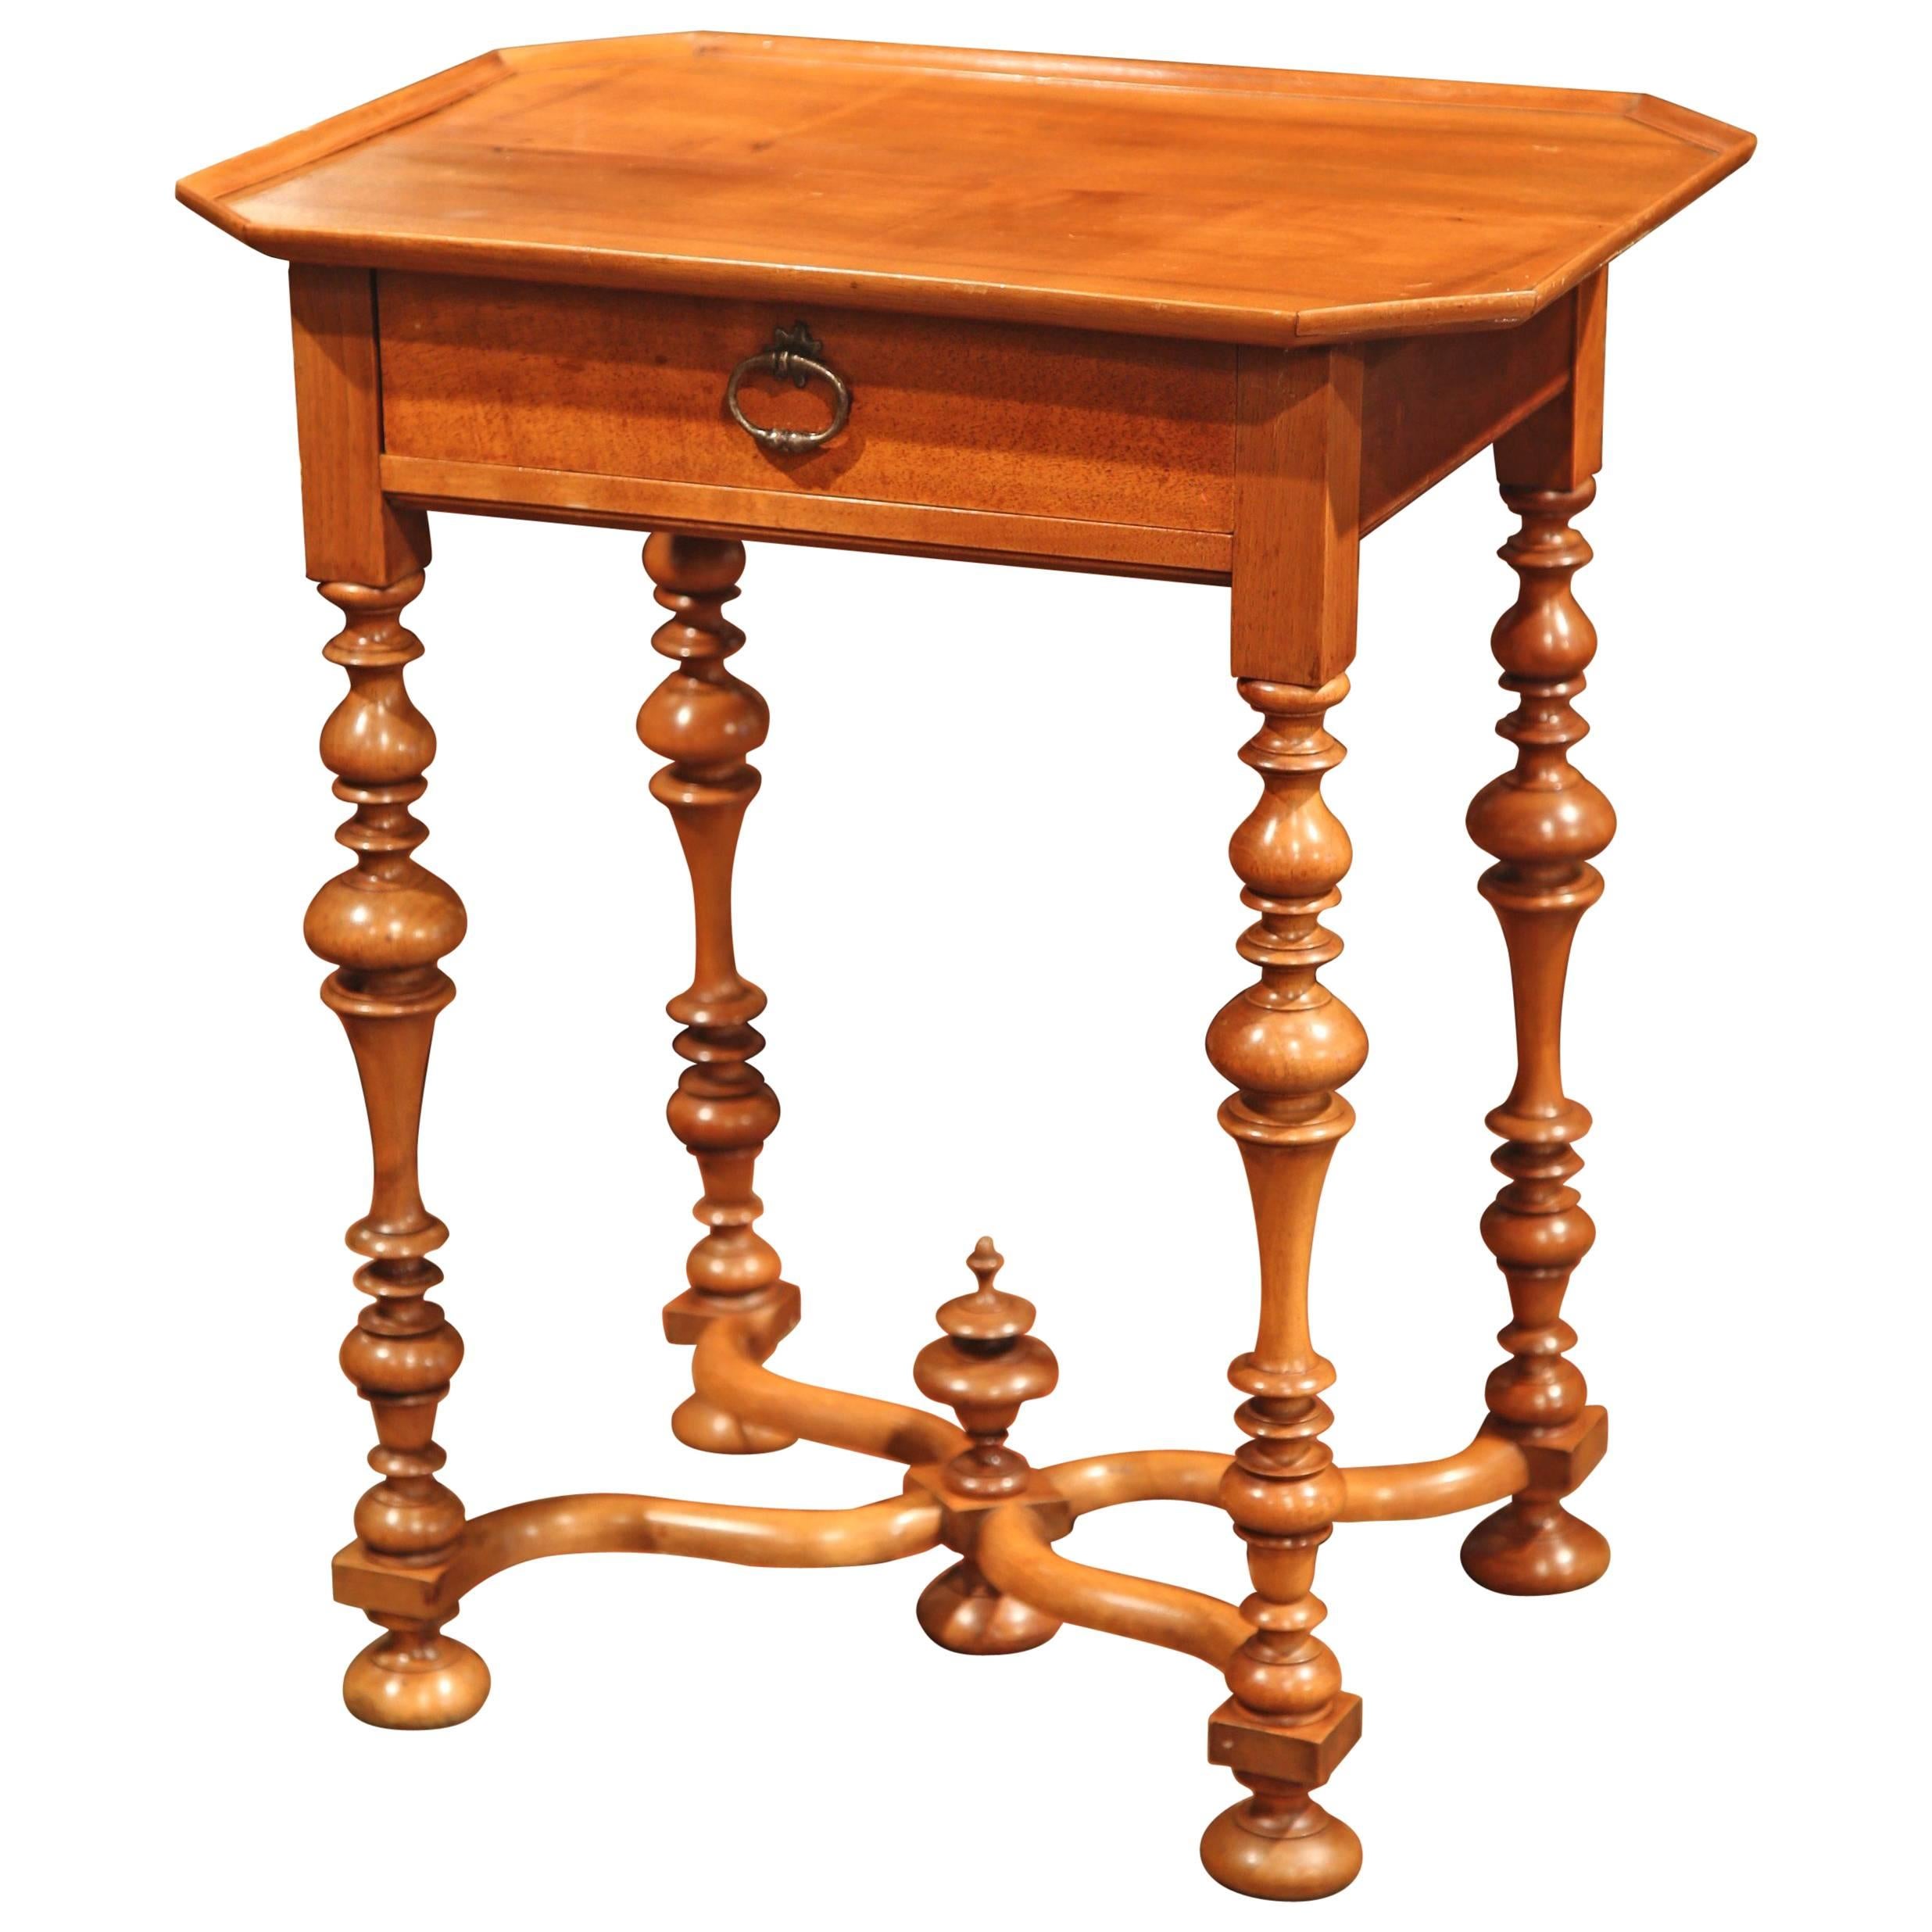 19th Century, French Louis XIII Cherry Side Table with Turned Legs and Stretcher